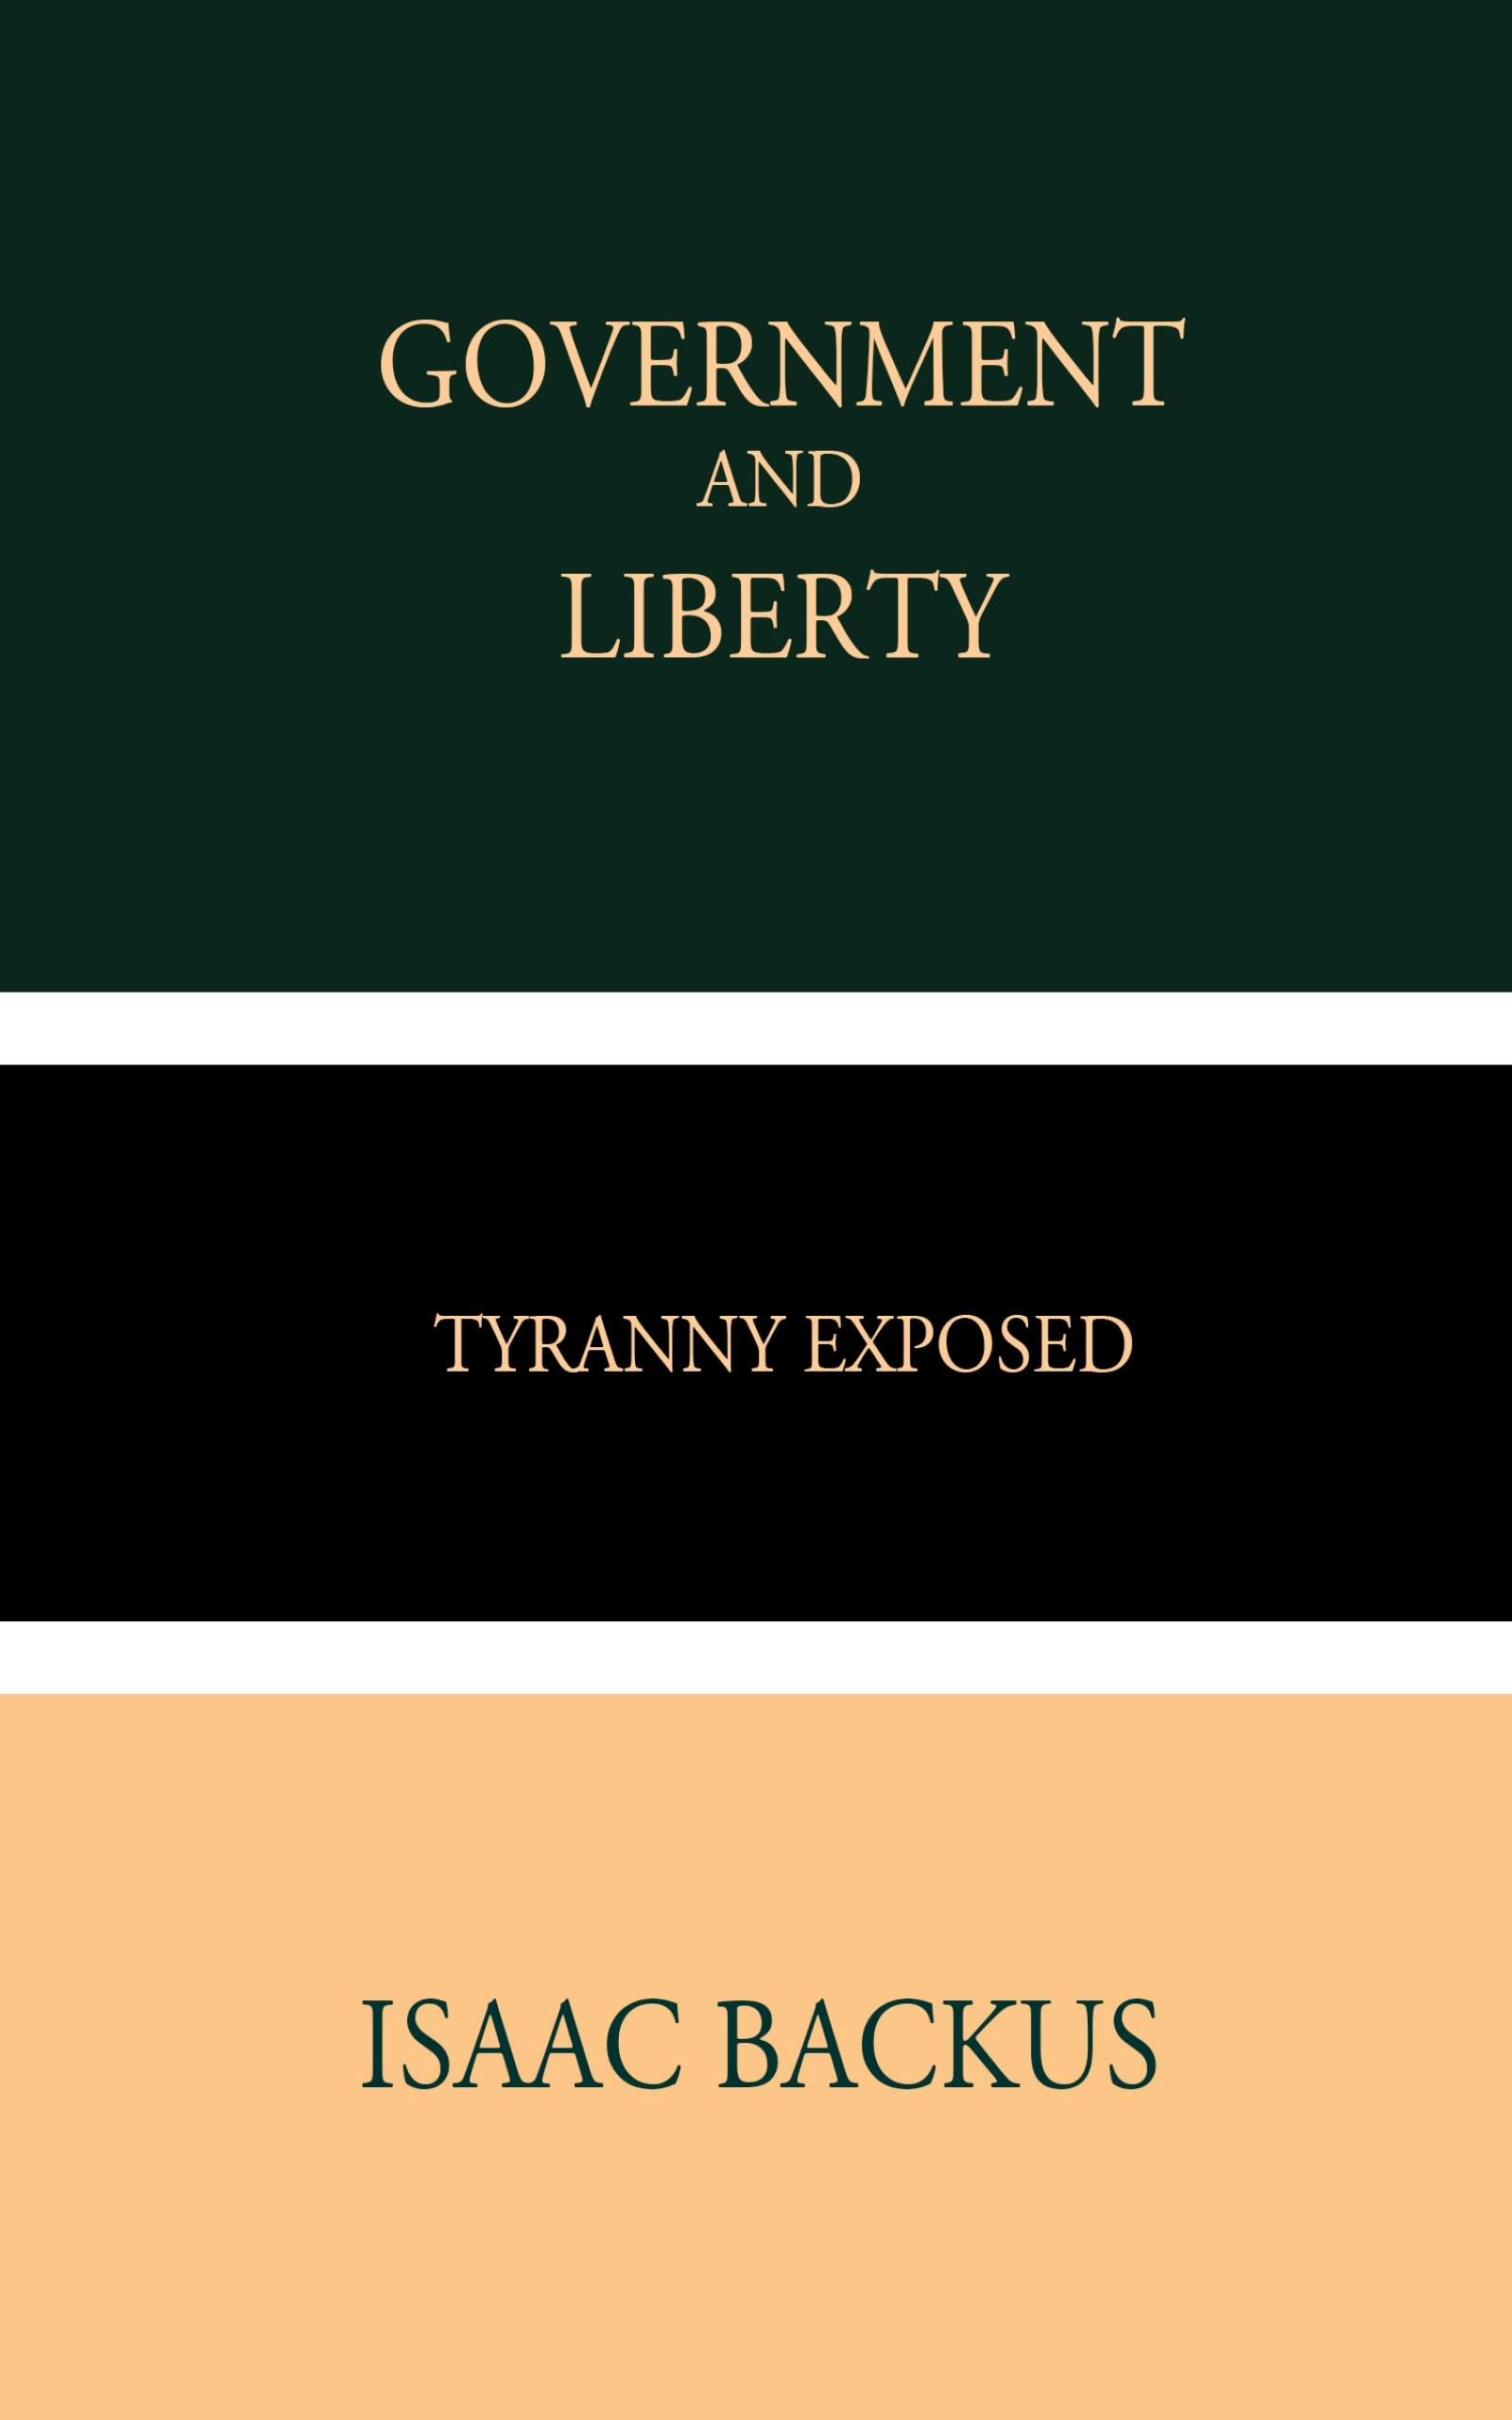 Government and Liberty - undefined